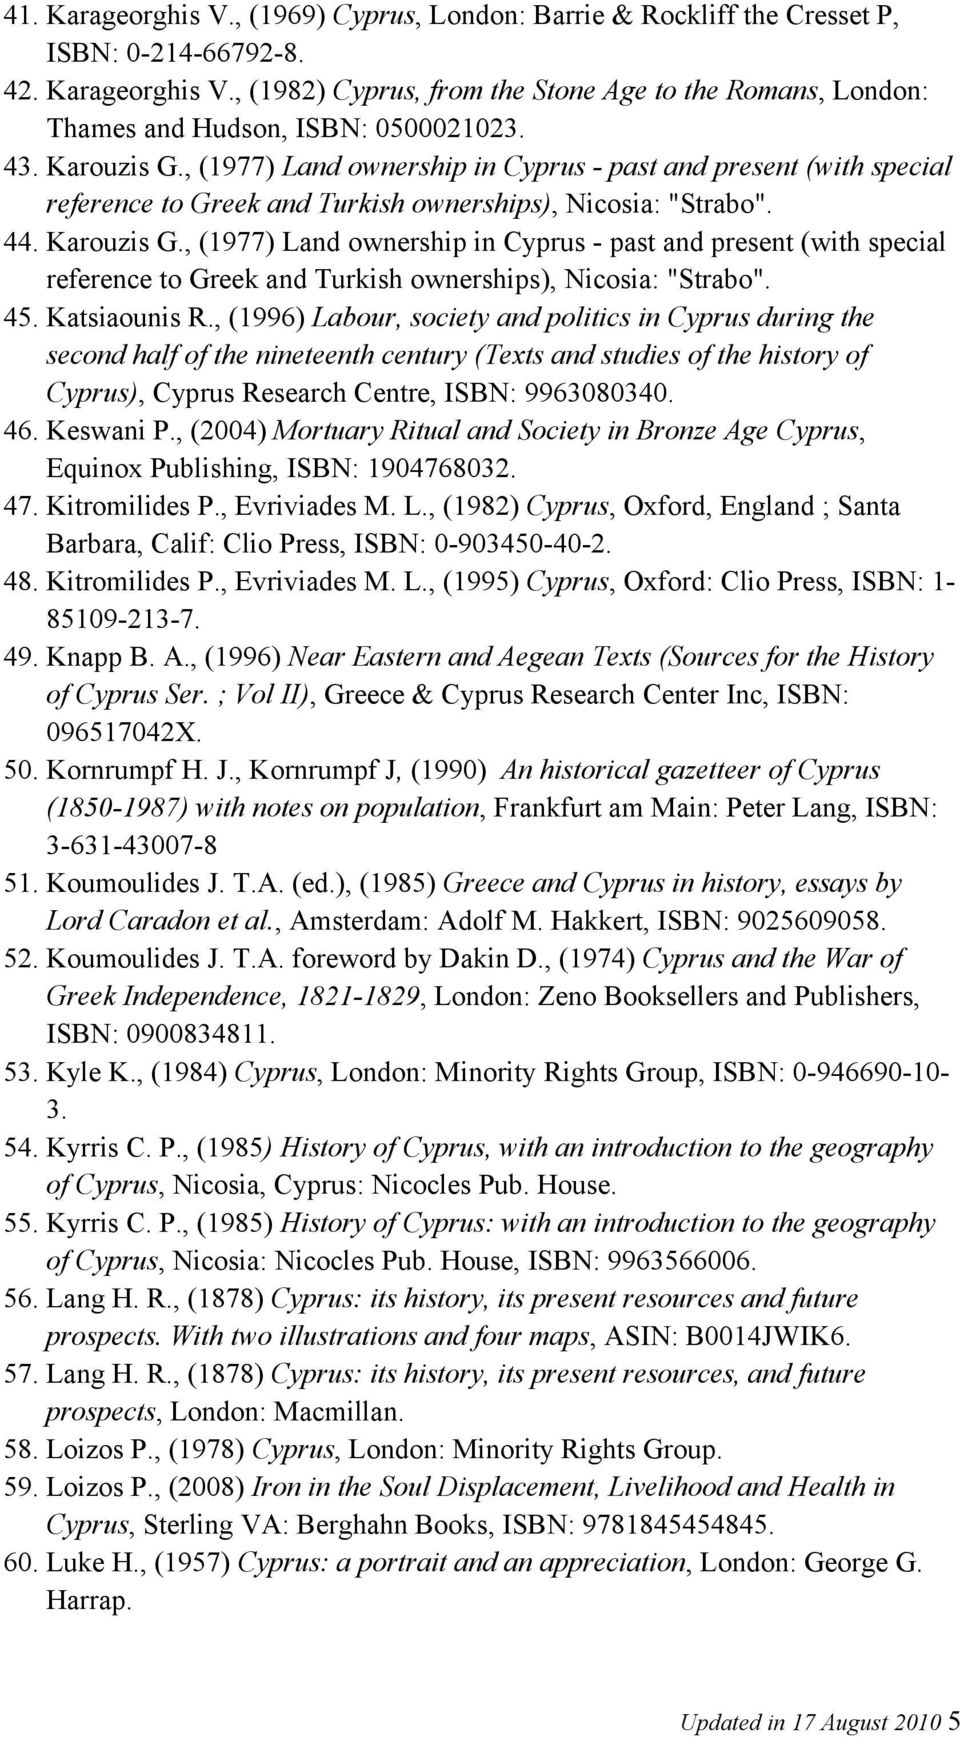 Katsiaounis R., (1996) Labour, society and politics in Cyprus during the second half of the nineteenth century (Texts and studies of the history of Cyprus), Cyprus Research Centre, ISBN: 9963080340.